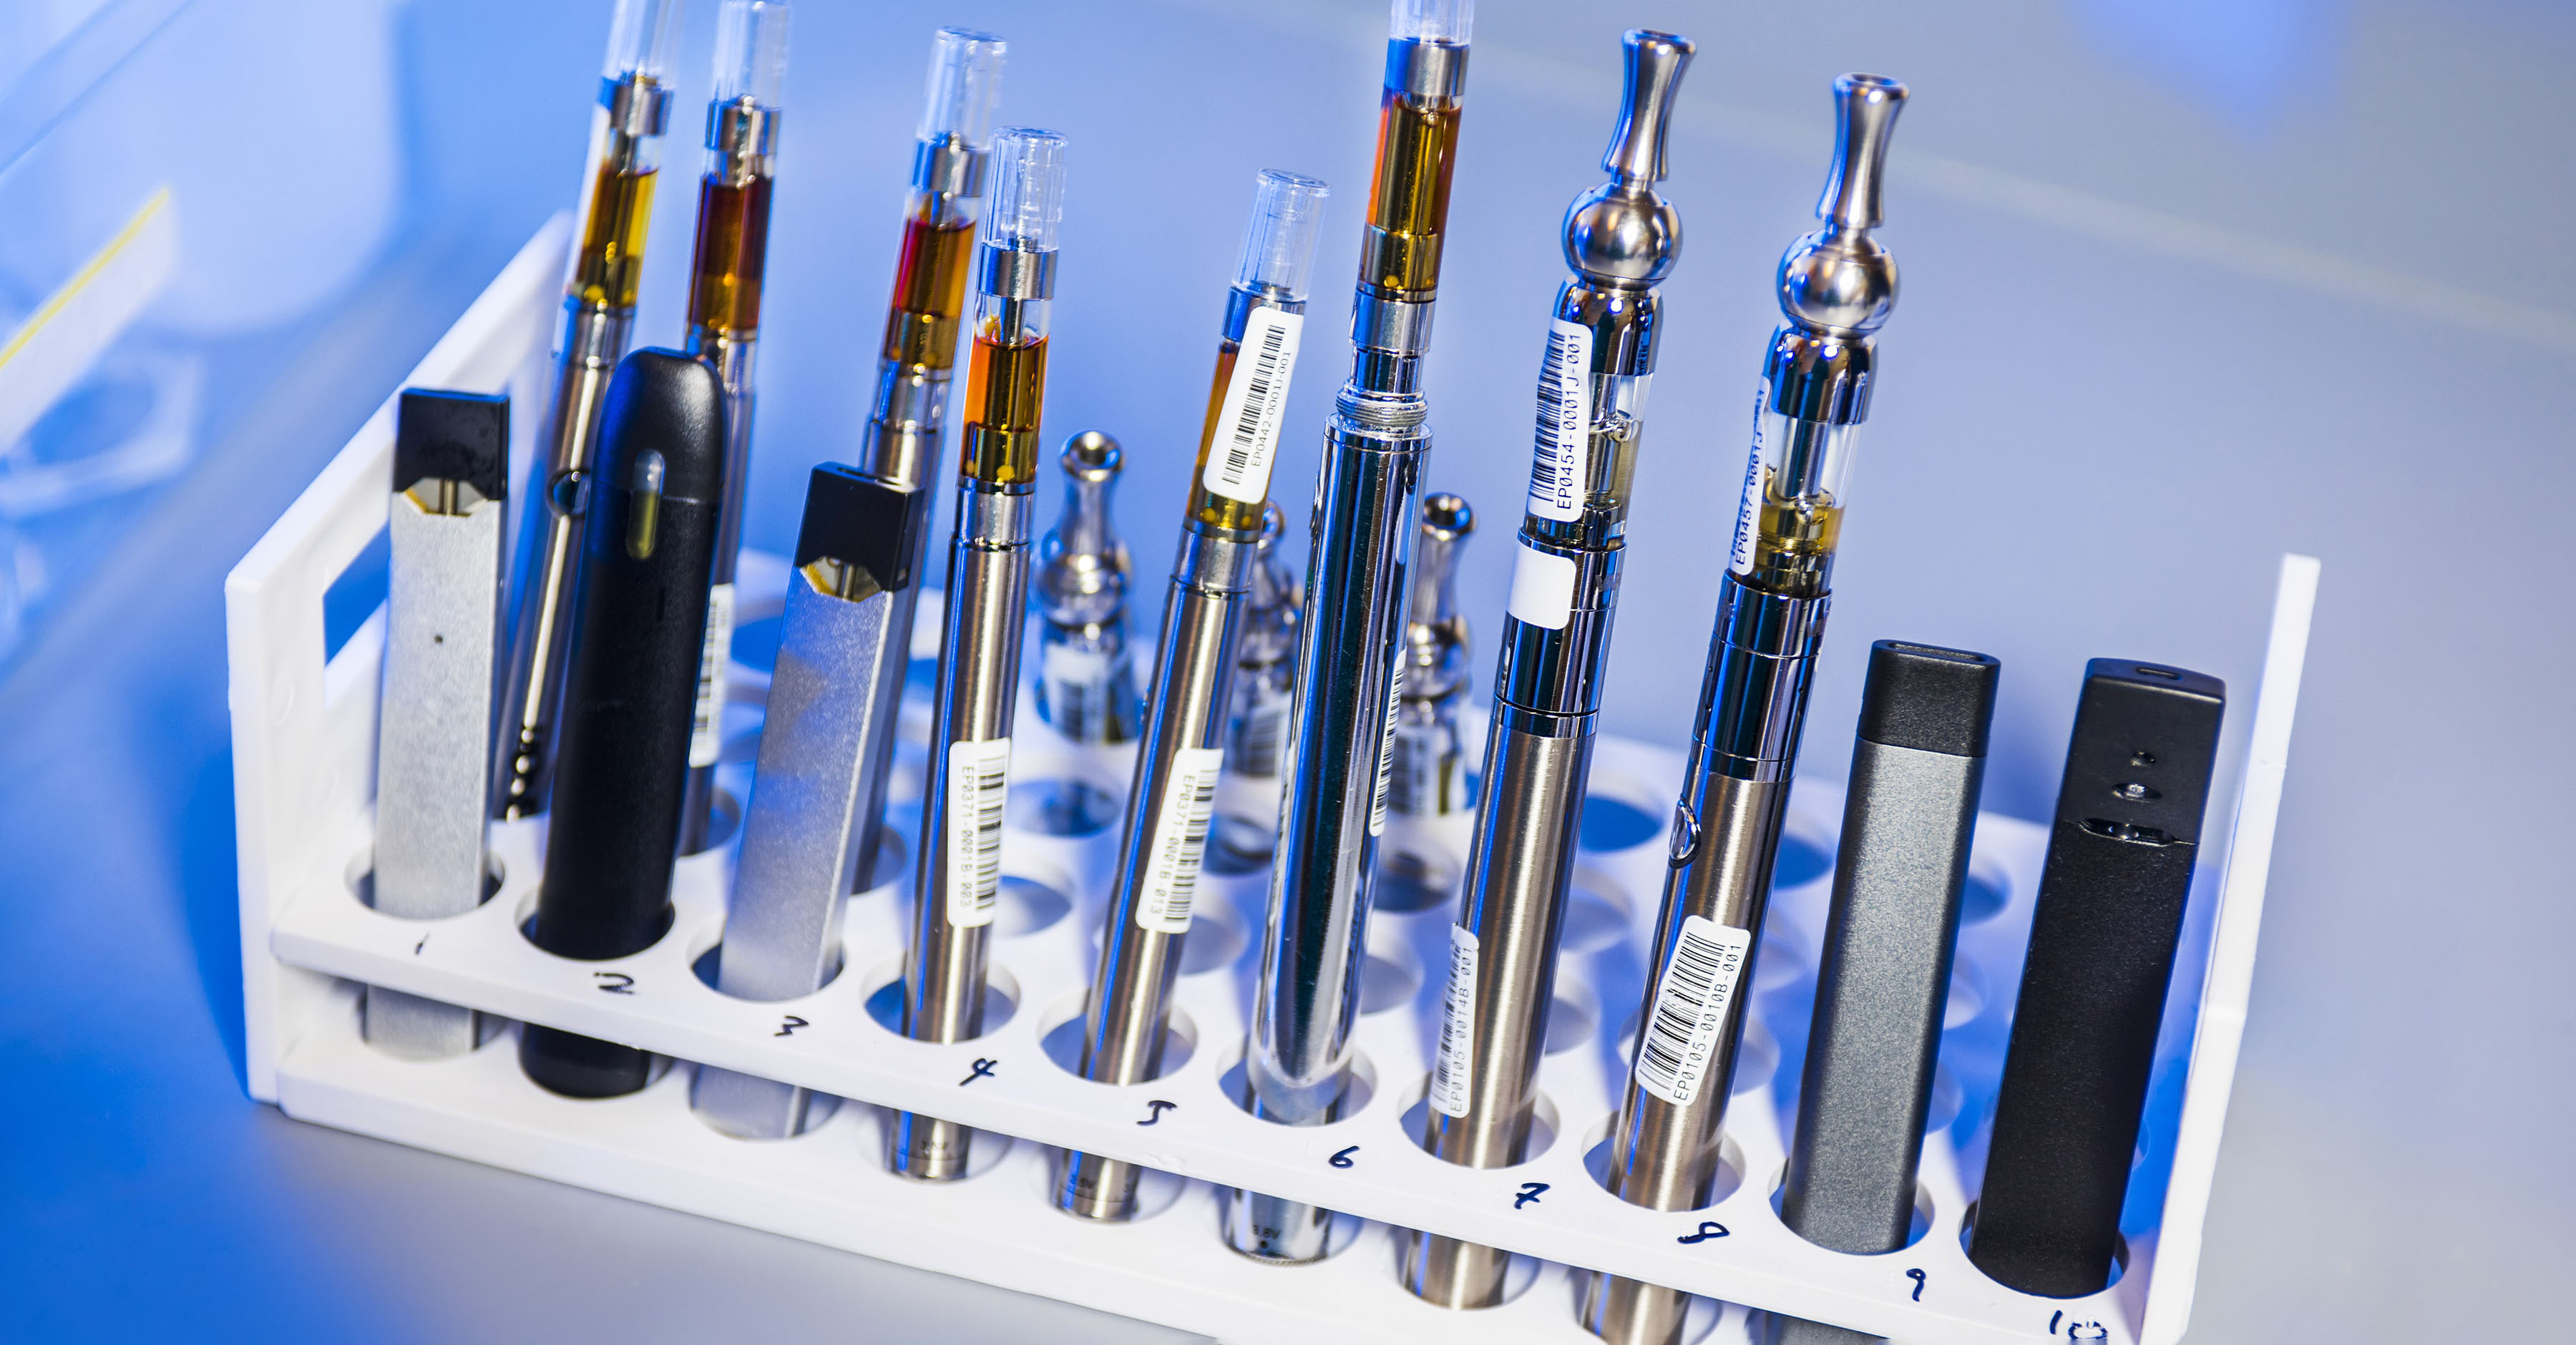 A series of vape pens in a stand for testing.